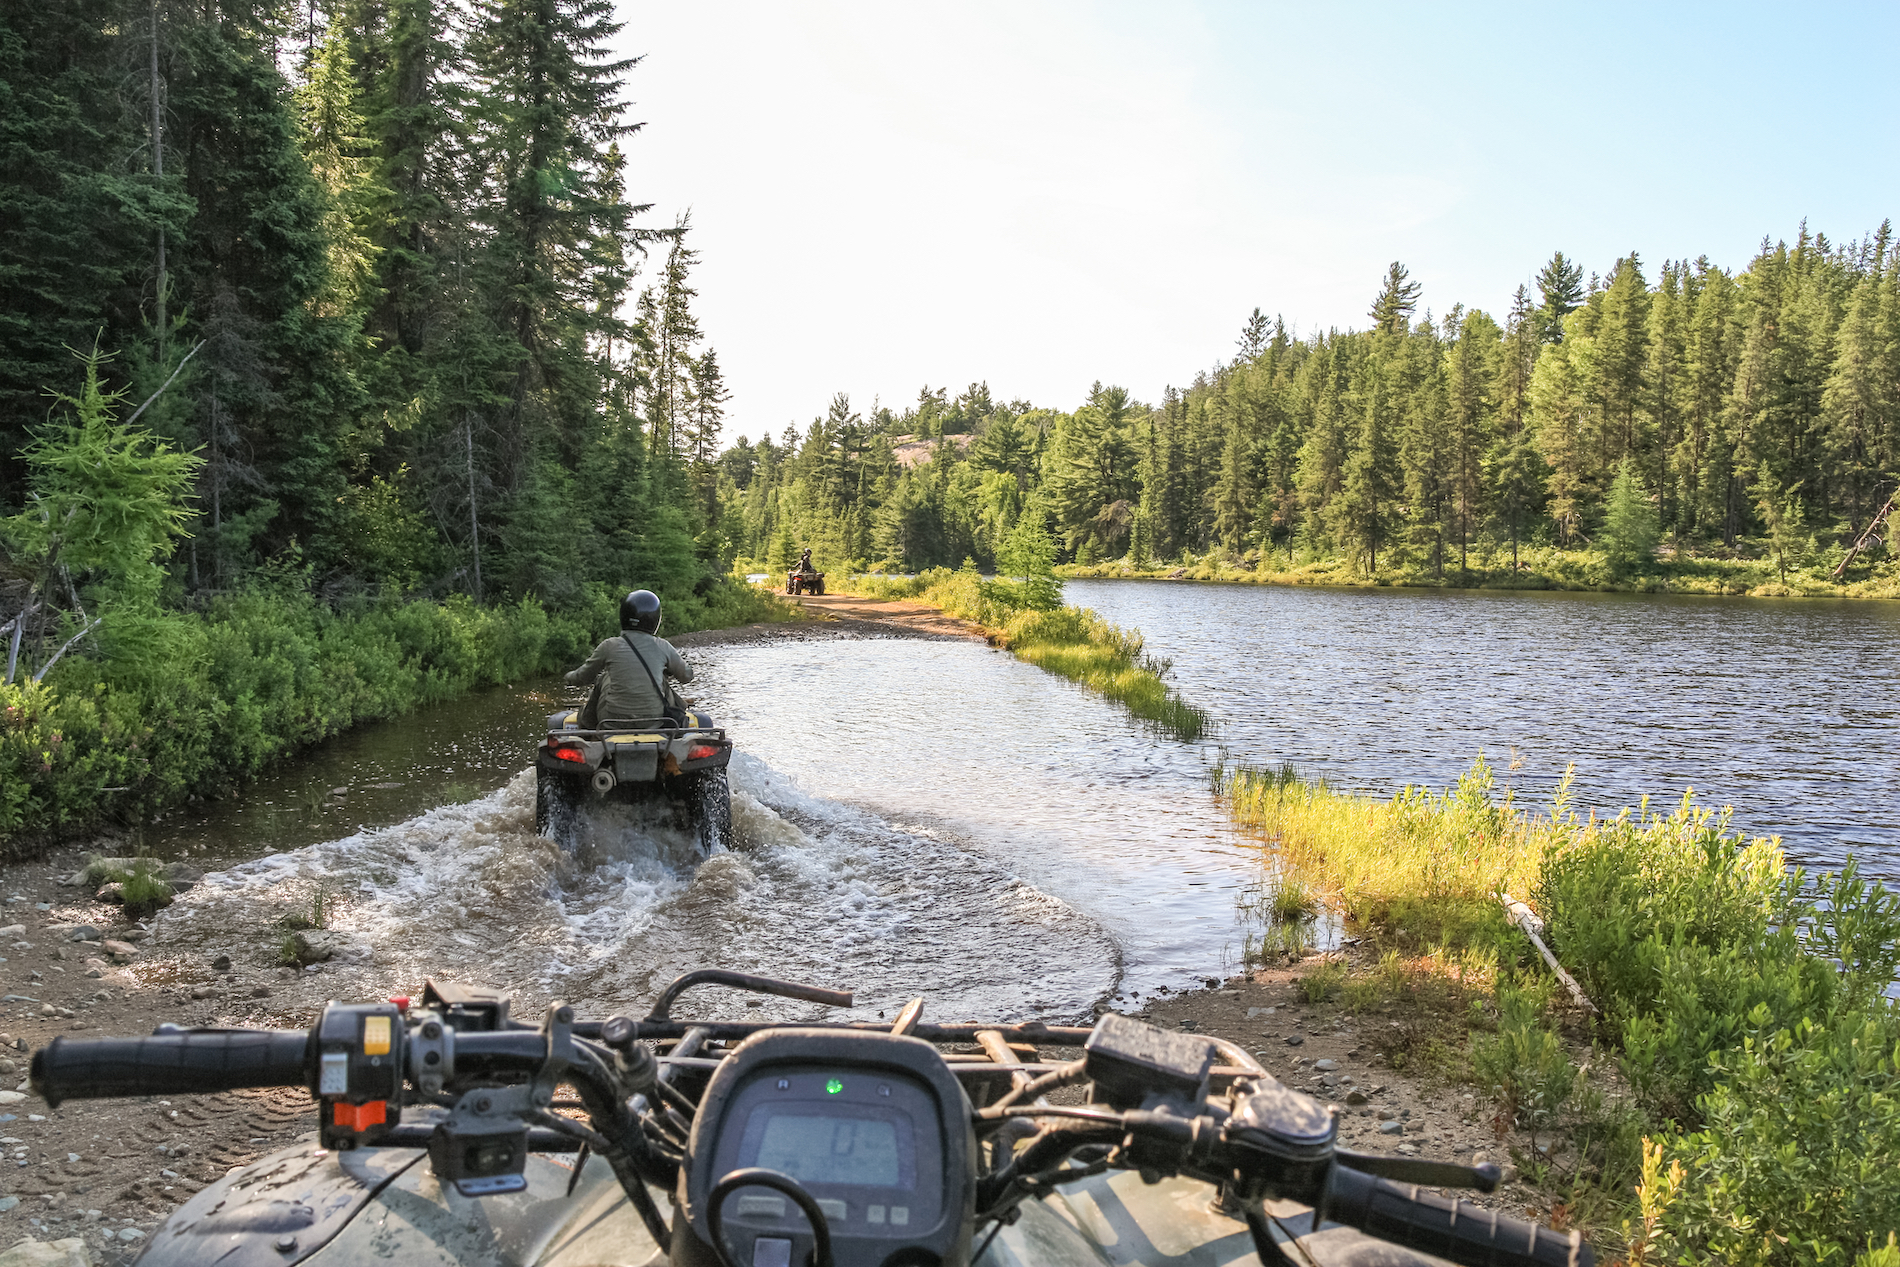 The Best ATV Trails in the Pacific Northwest - ZMPerformance